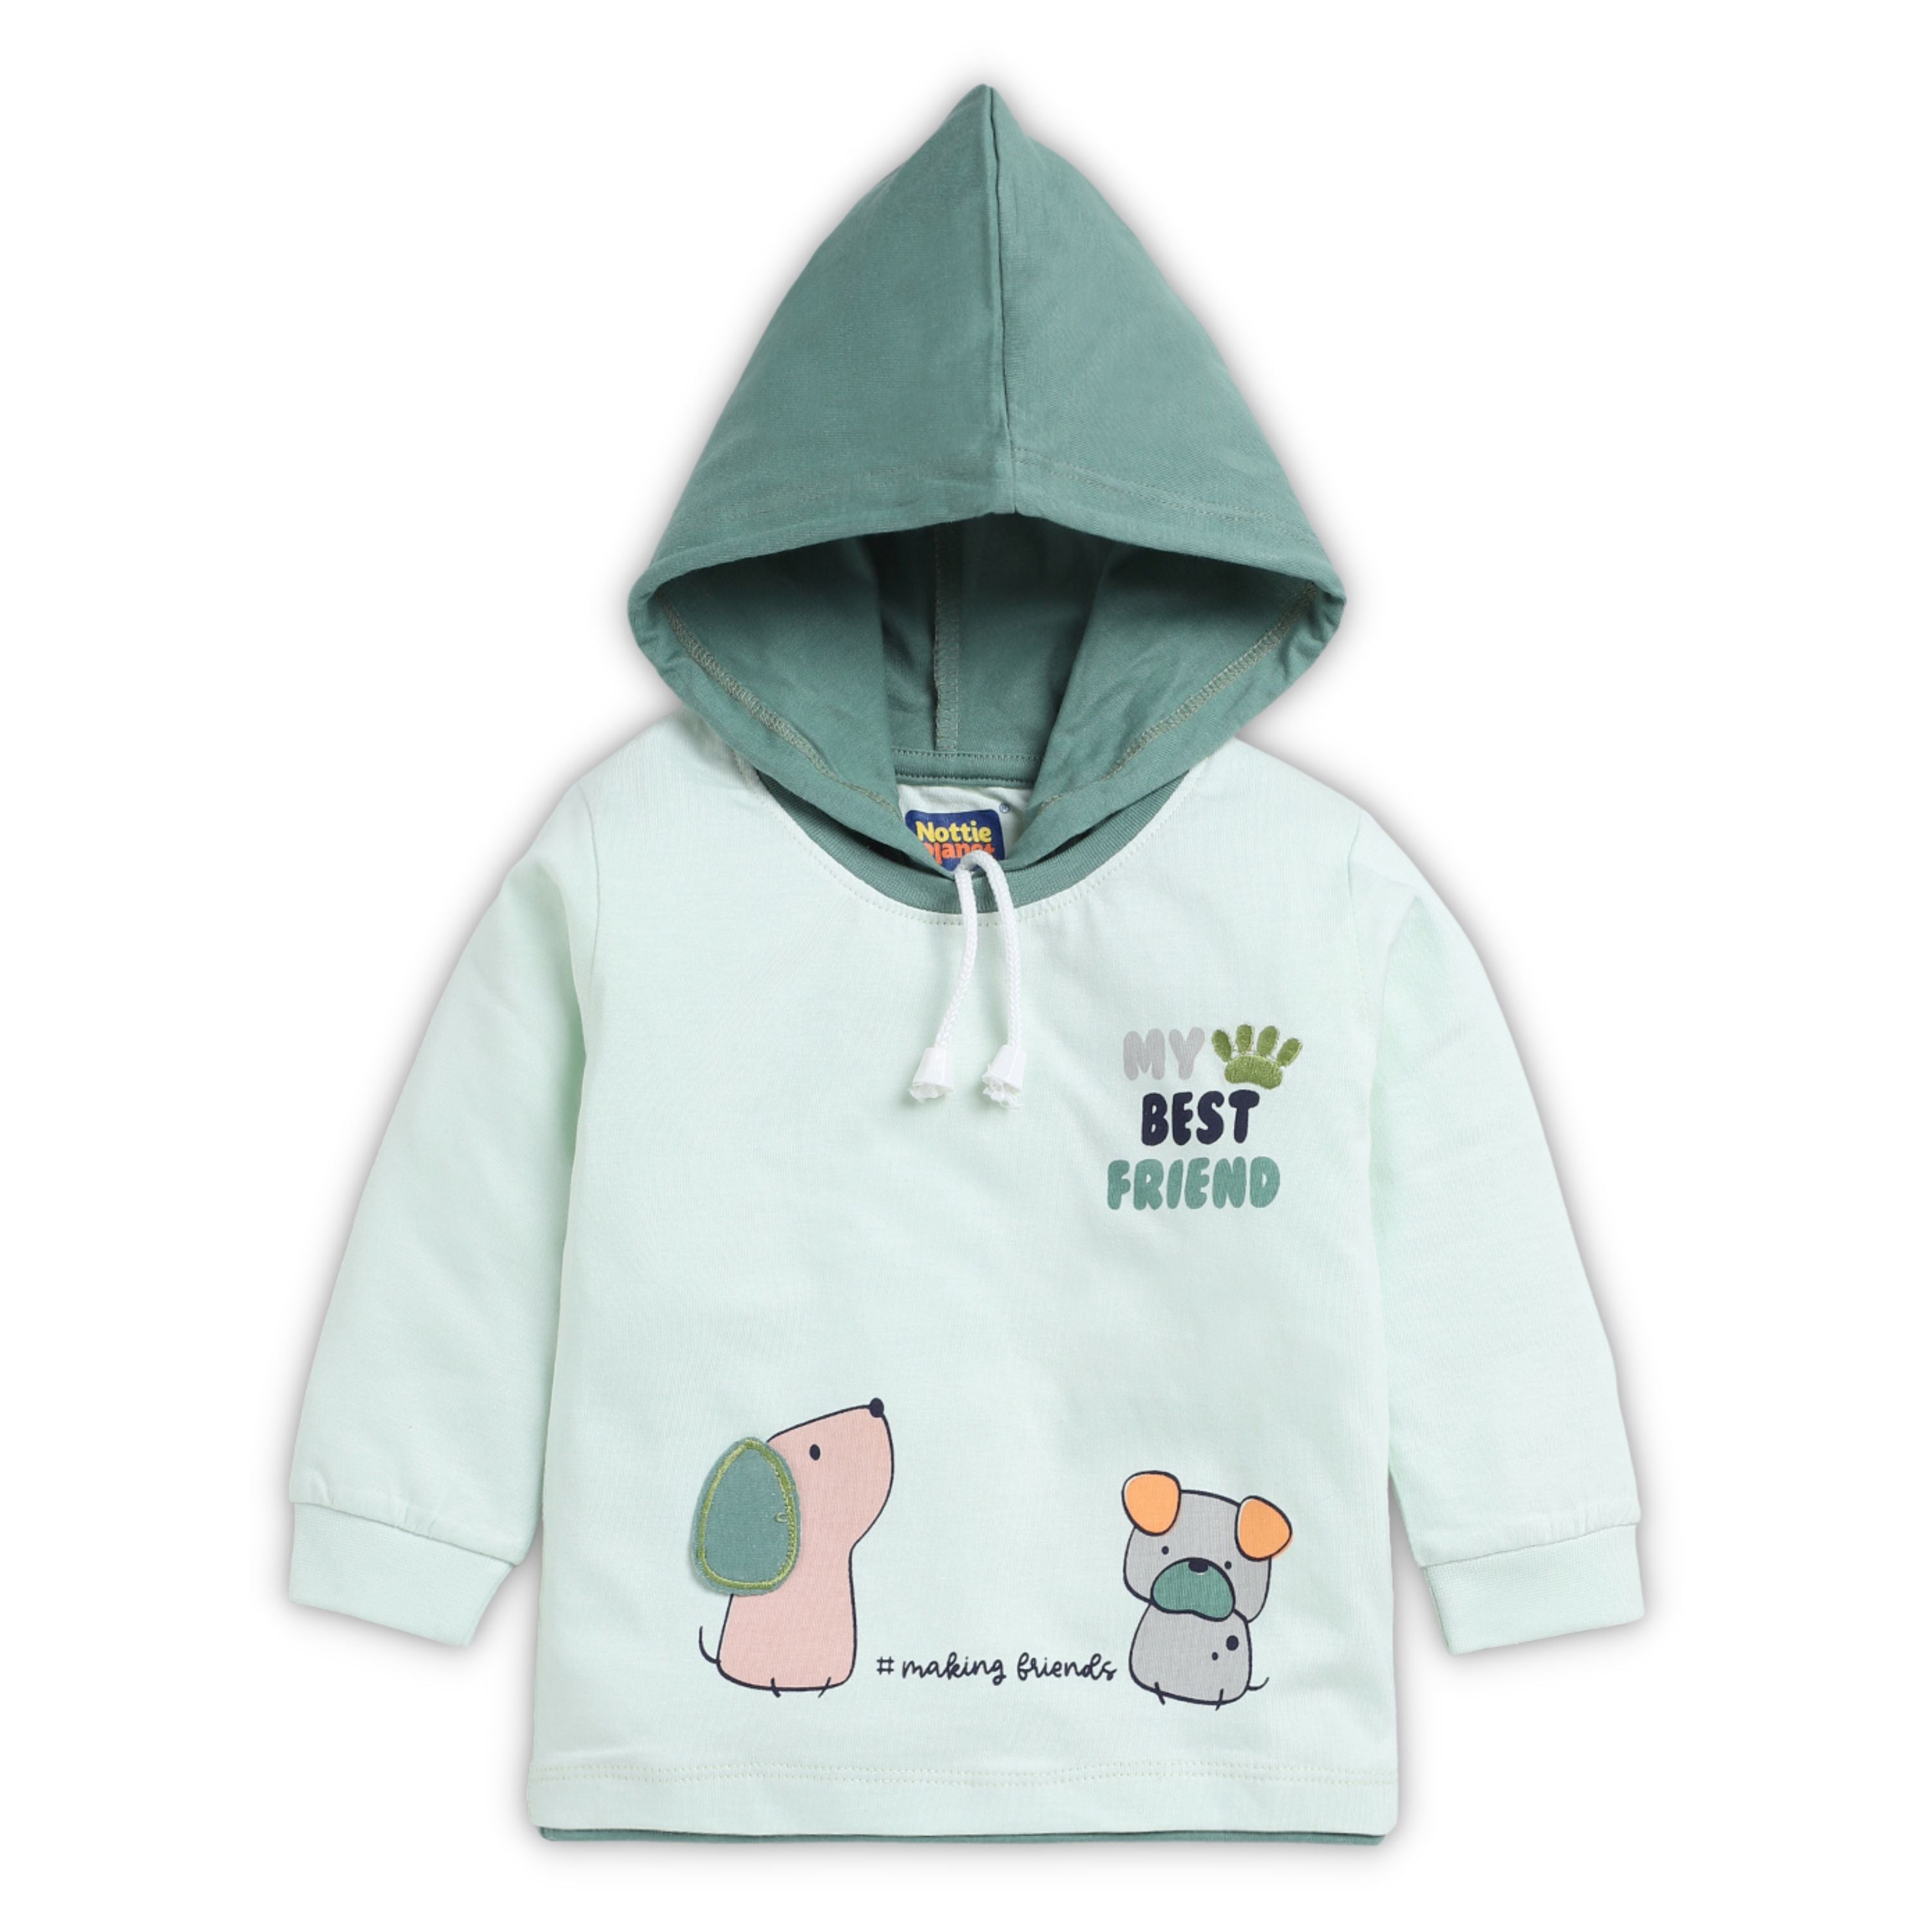 HOODED CLOTHING SET FOR BOY - OLIVE GREEN